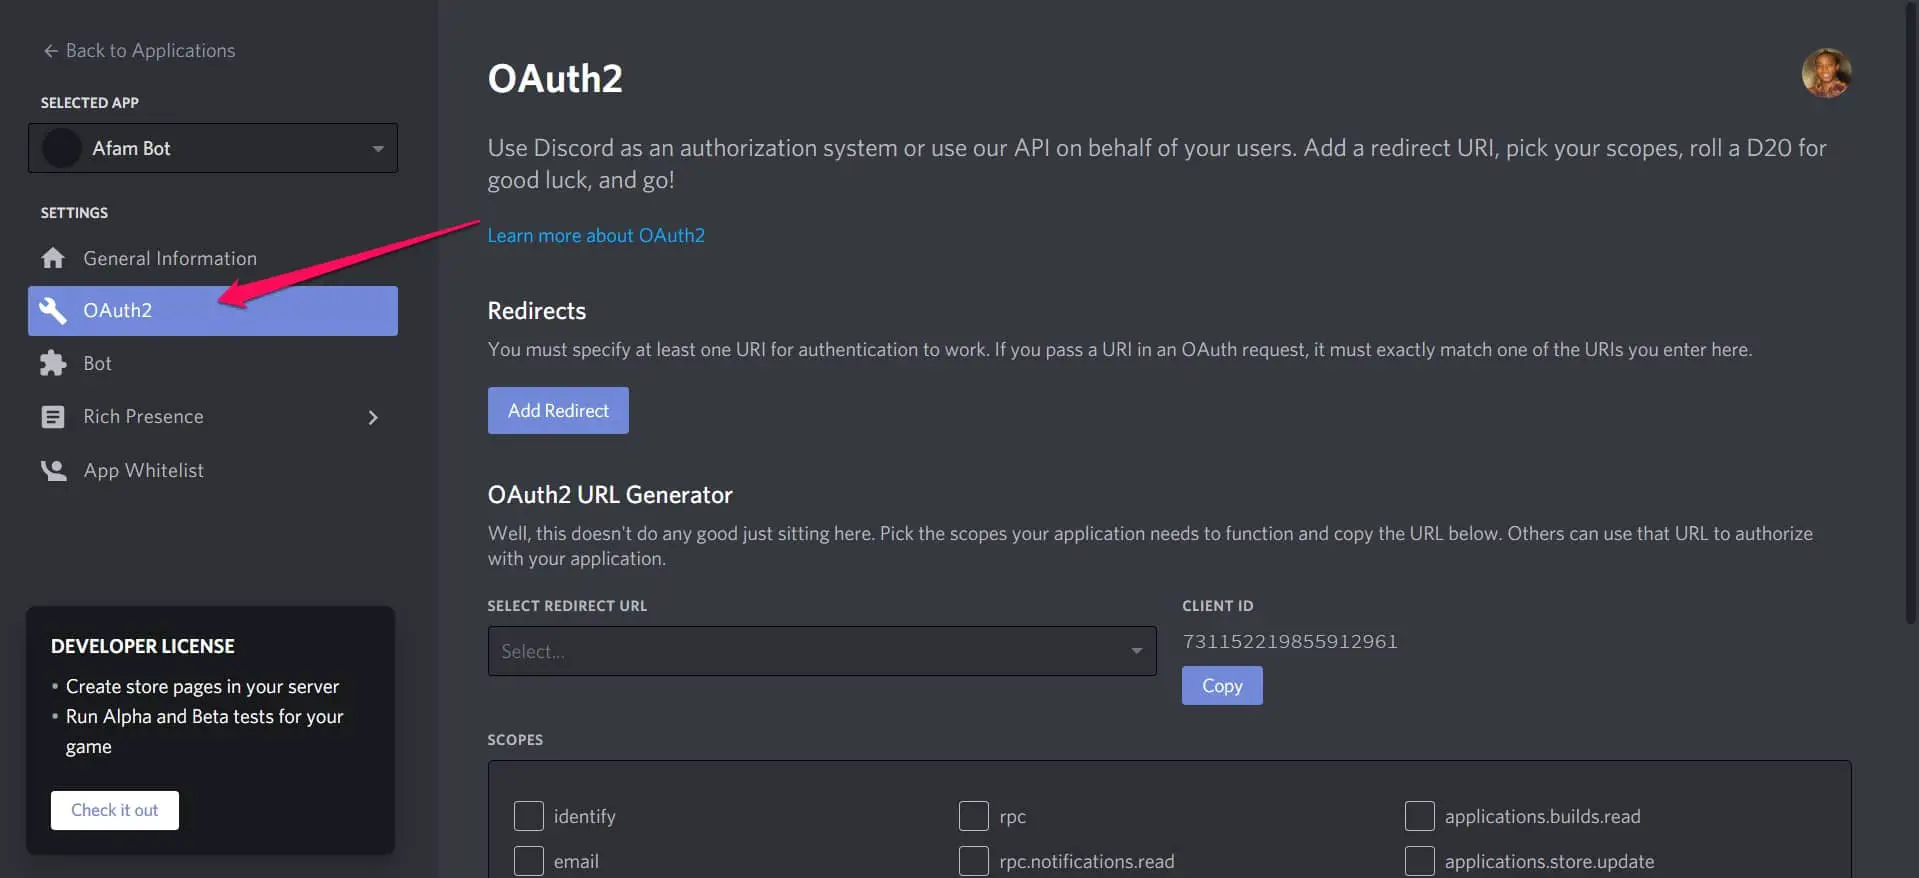 How To Make a Discord Bot [New Step-By-Step Guide]